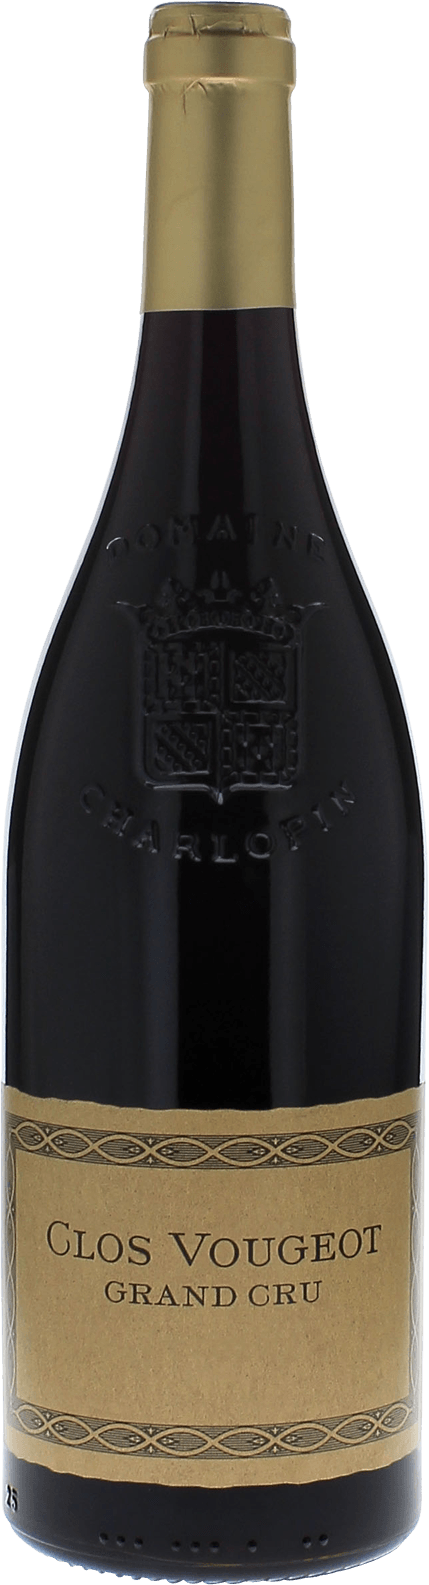 Clos vougeot grand cru 2014 Domaine CHARLOPIN, Bourgogne rouge